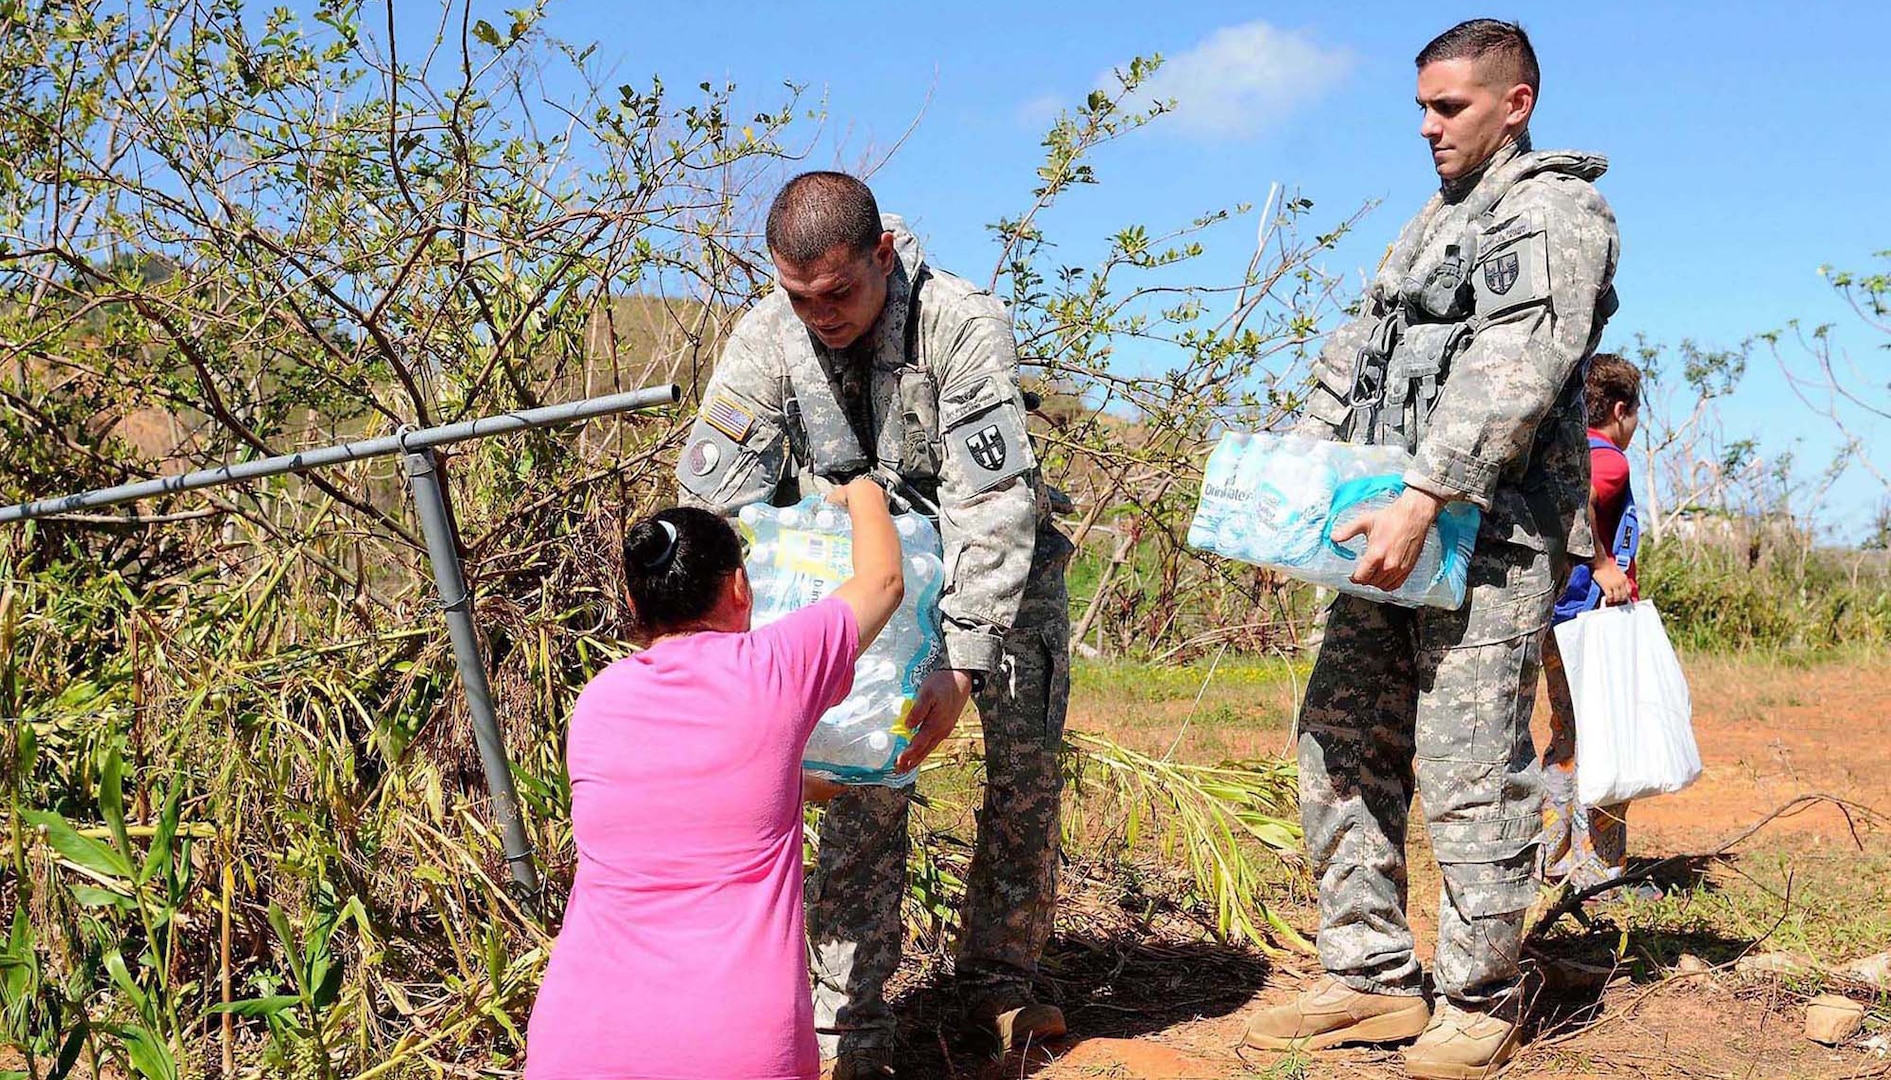 Citizen-Soldiers of the Puerto Rico Army National Guard distributed supplies, food and water to isolated towns in Utuado, Puerto Rico, after Hurricane Maria devastated the island in September 2017.